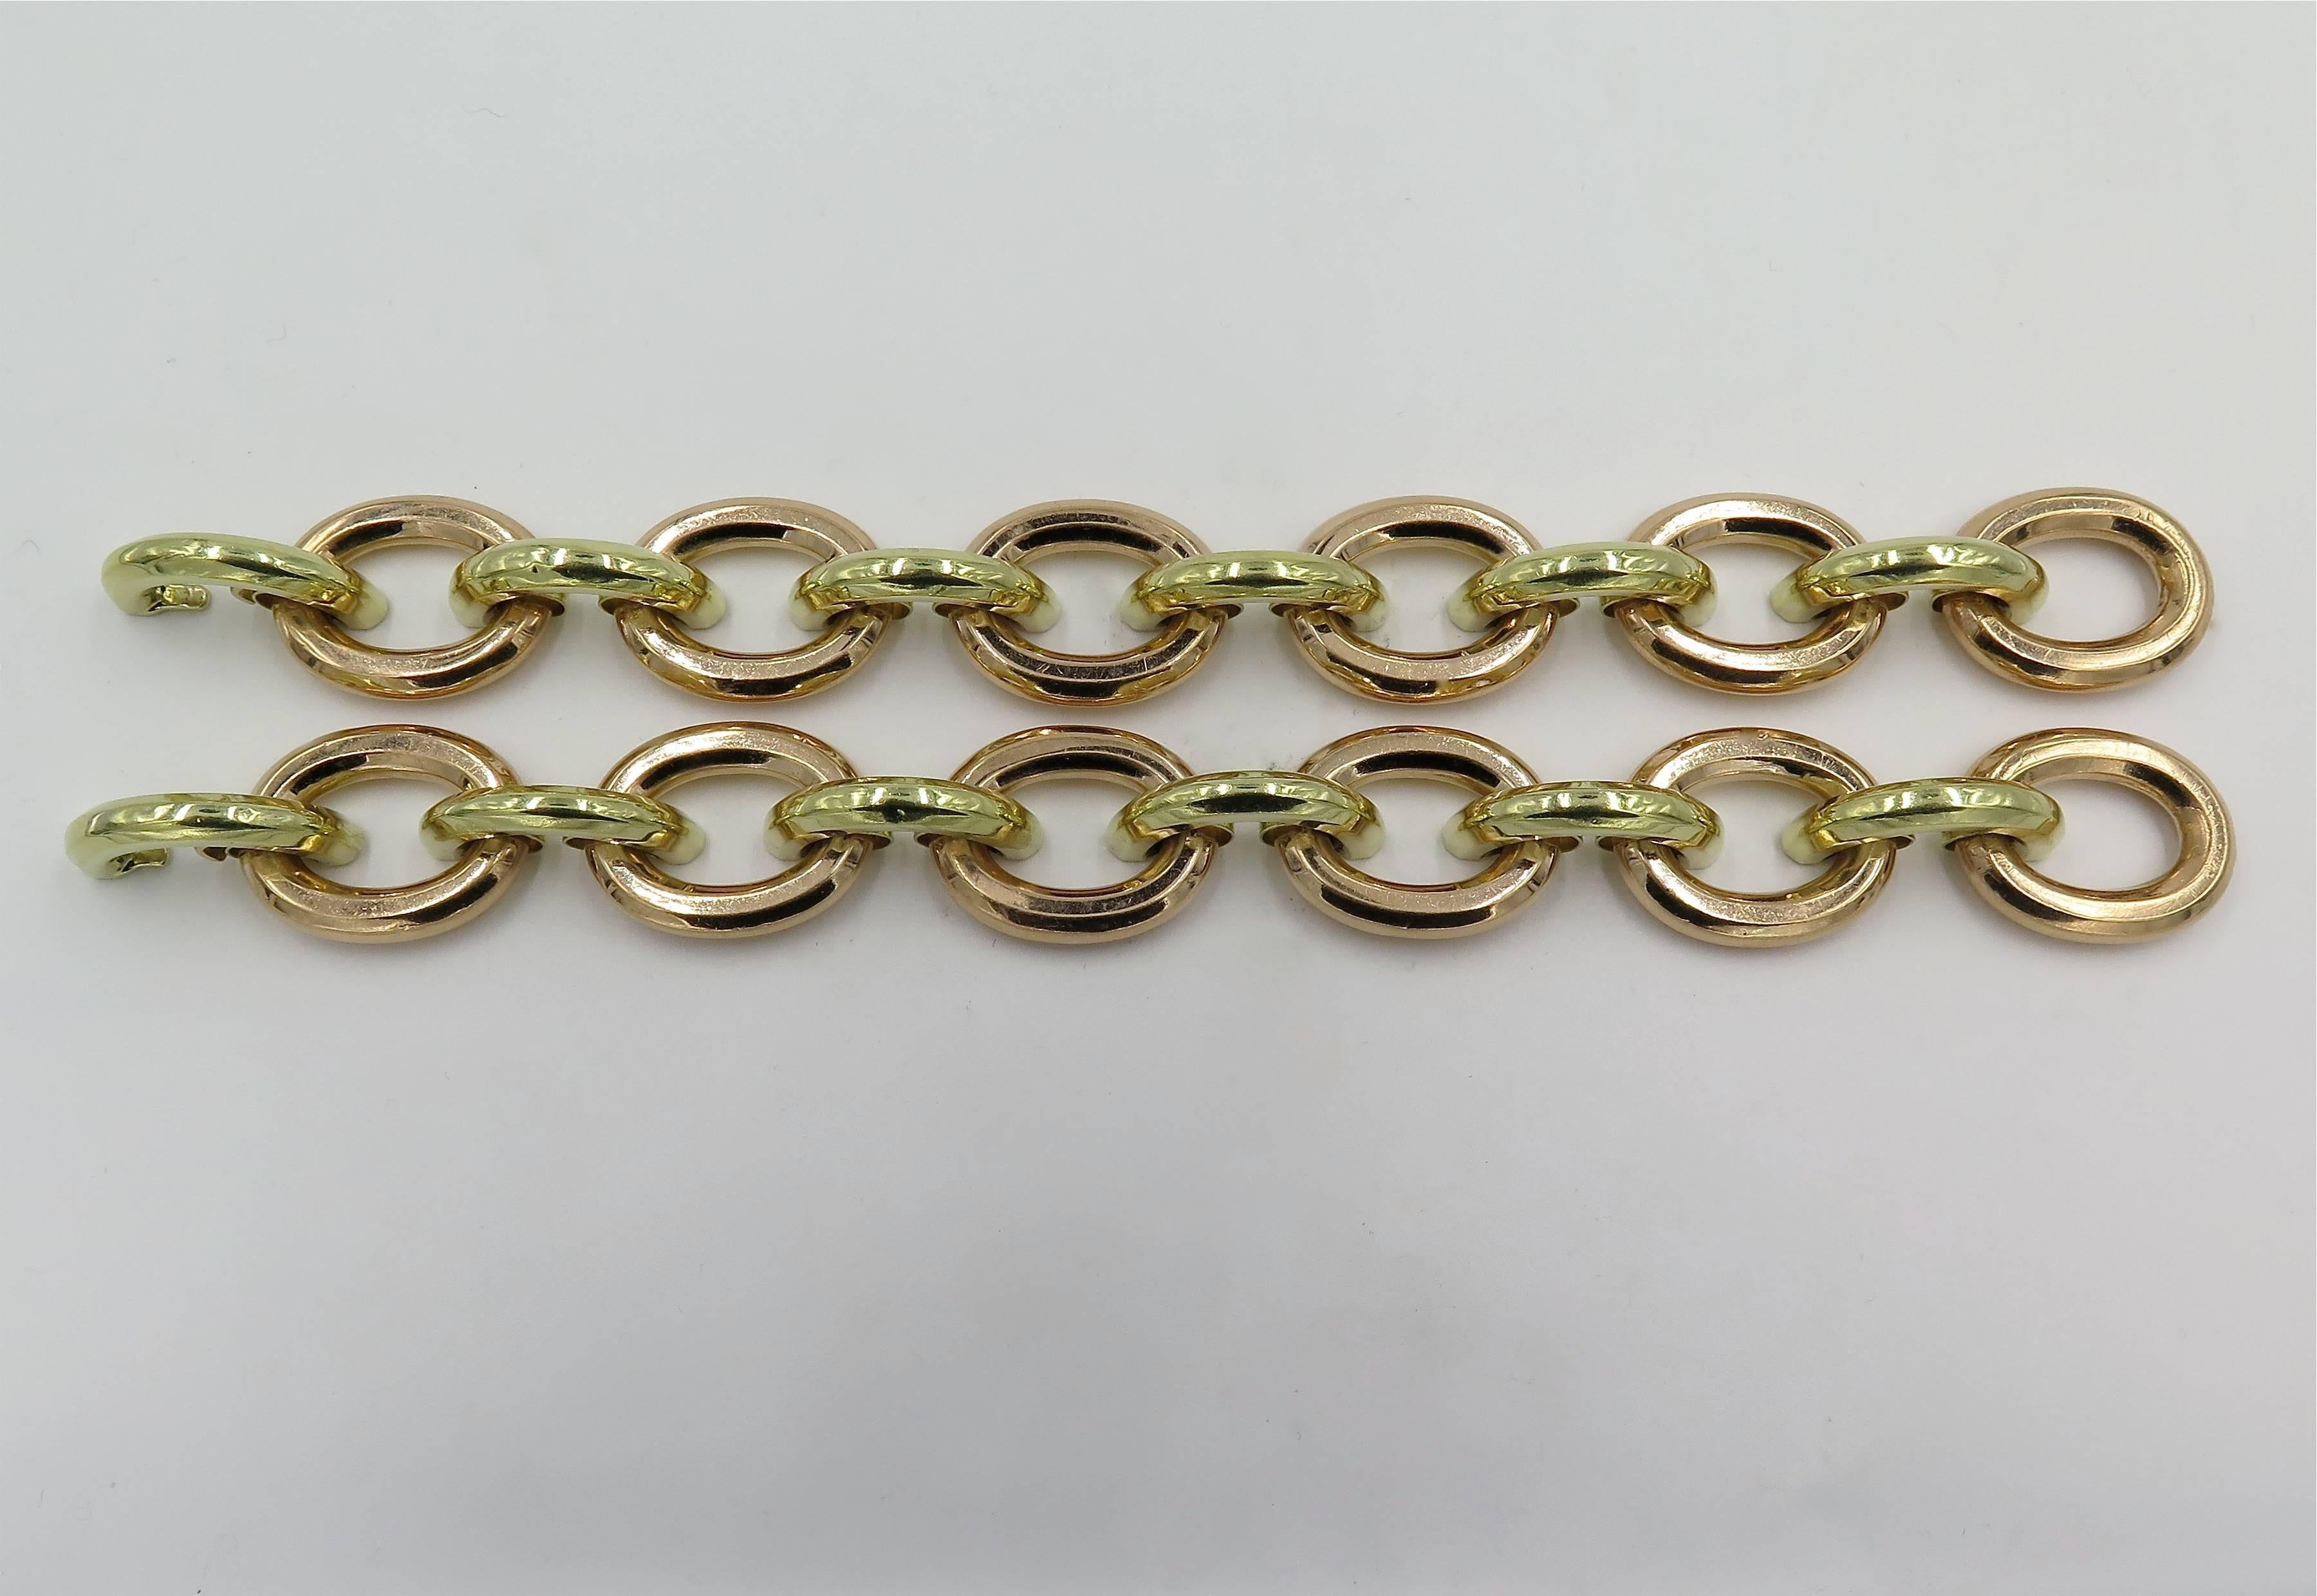 A pair of 14 karat rose and yellow gold bracelets. 1940. Each designed as a line of oval rose gold links, alternating with yellow gold curb link spacers. Length of each is approximately 7 1/4 inches. Gross weight is approximately 59.6 grams. 